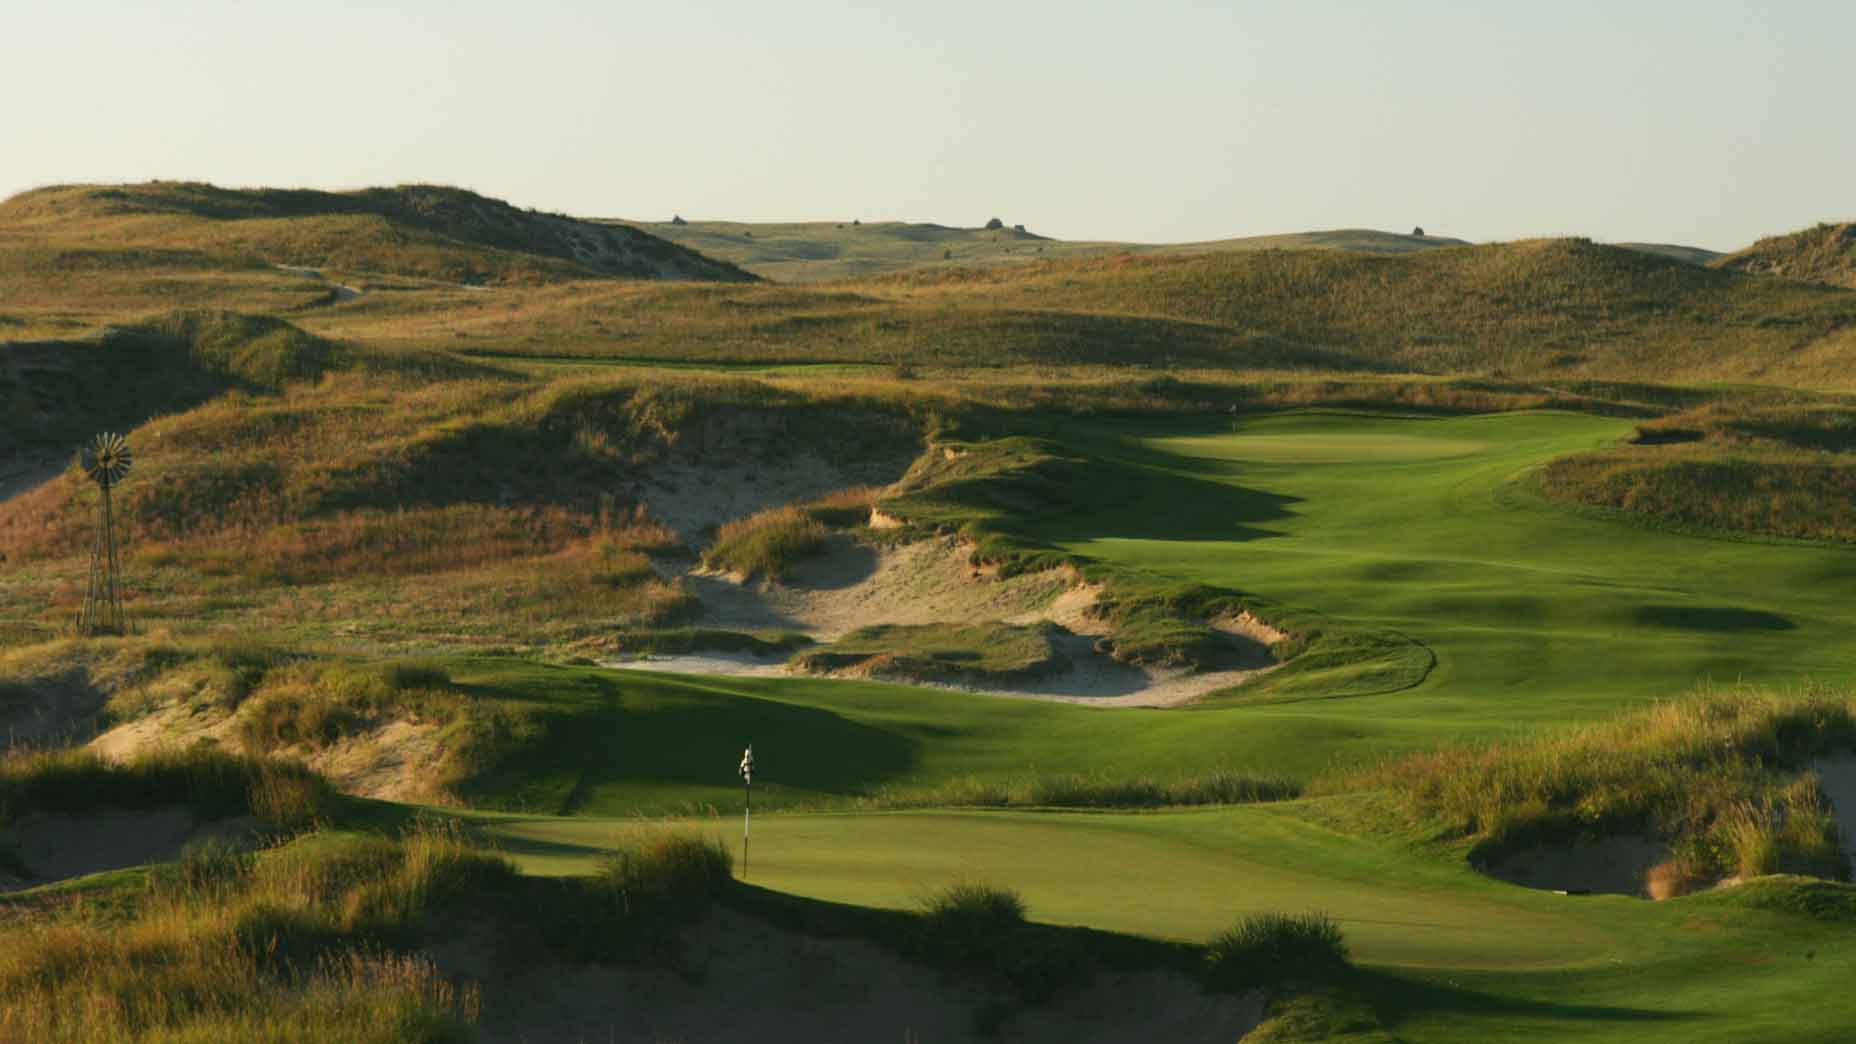 The 17th hole at Sand Hills golf course